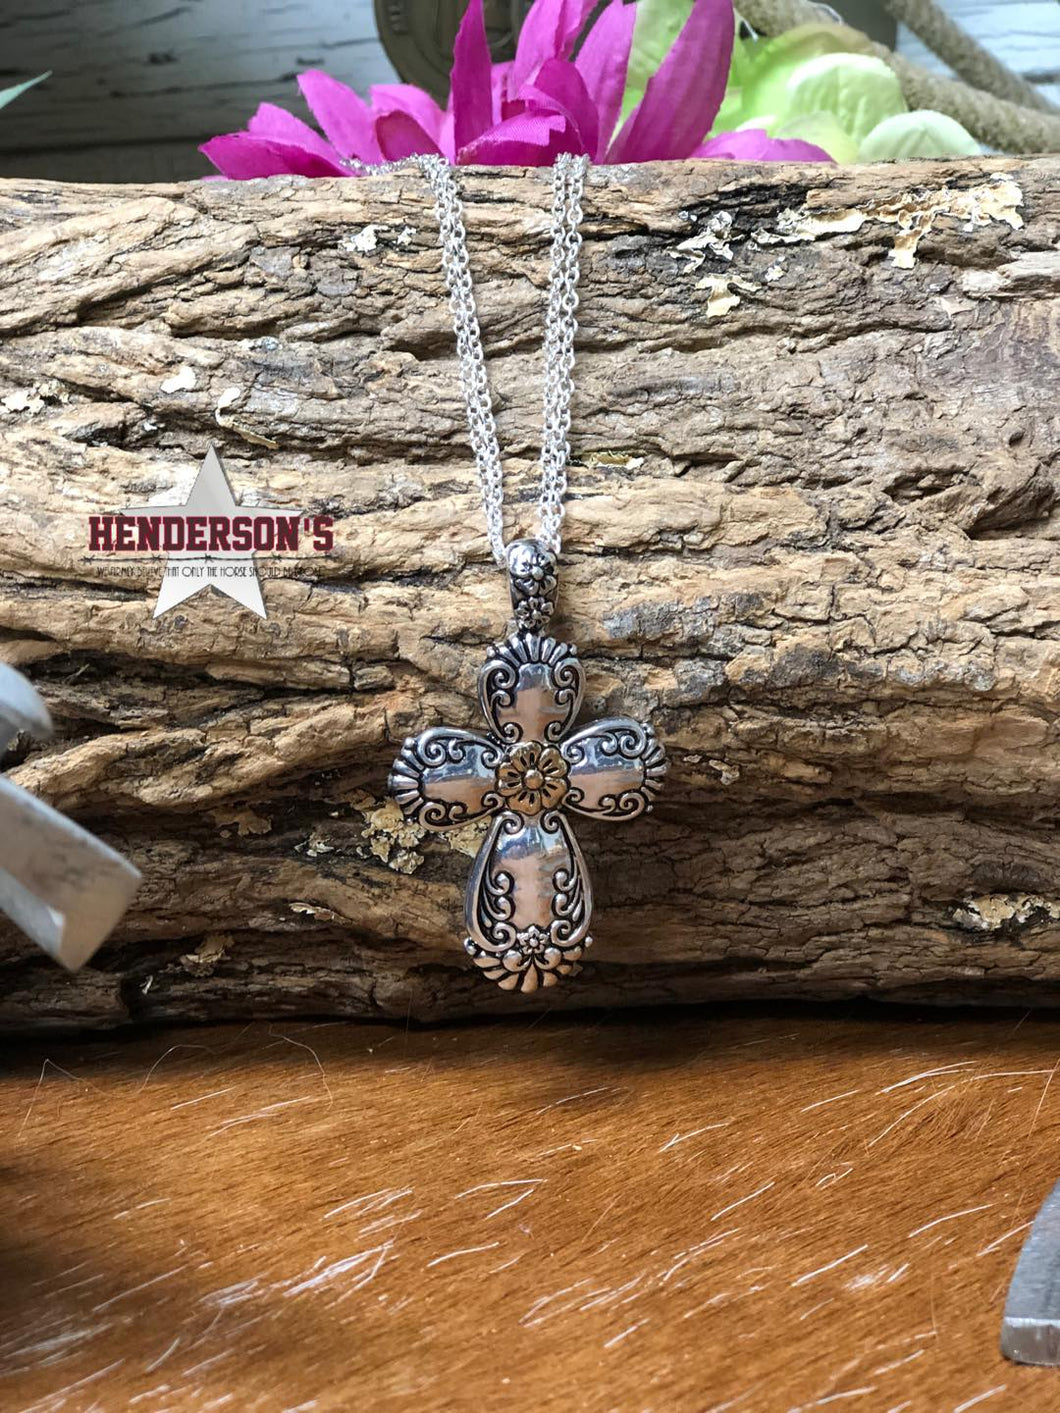 Paisley Cross Necklace - Henderson's Western Store